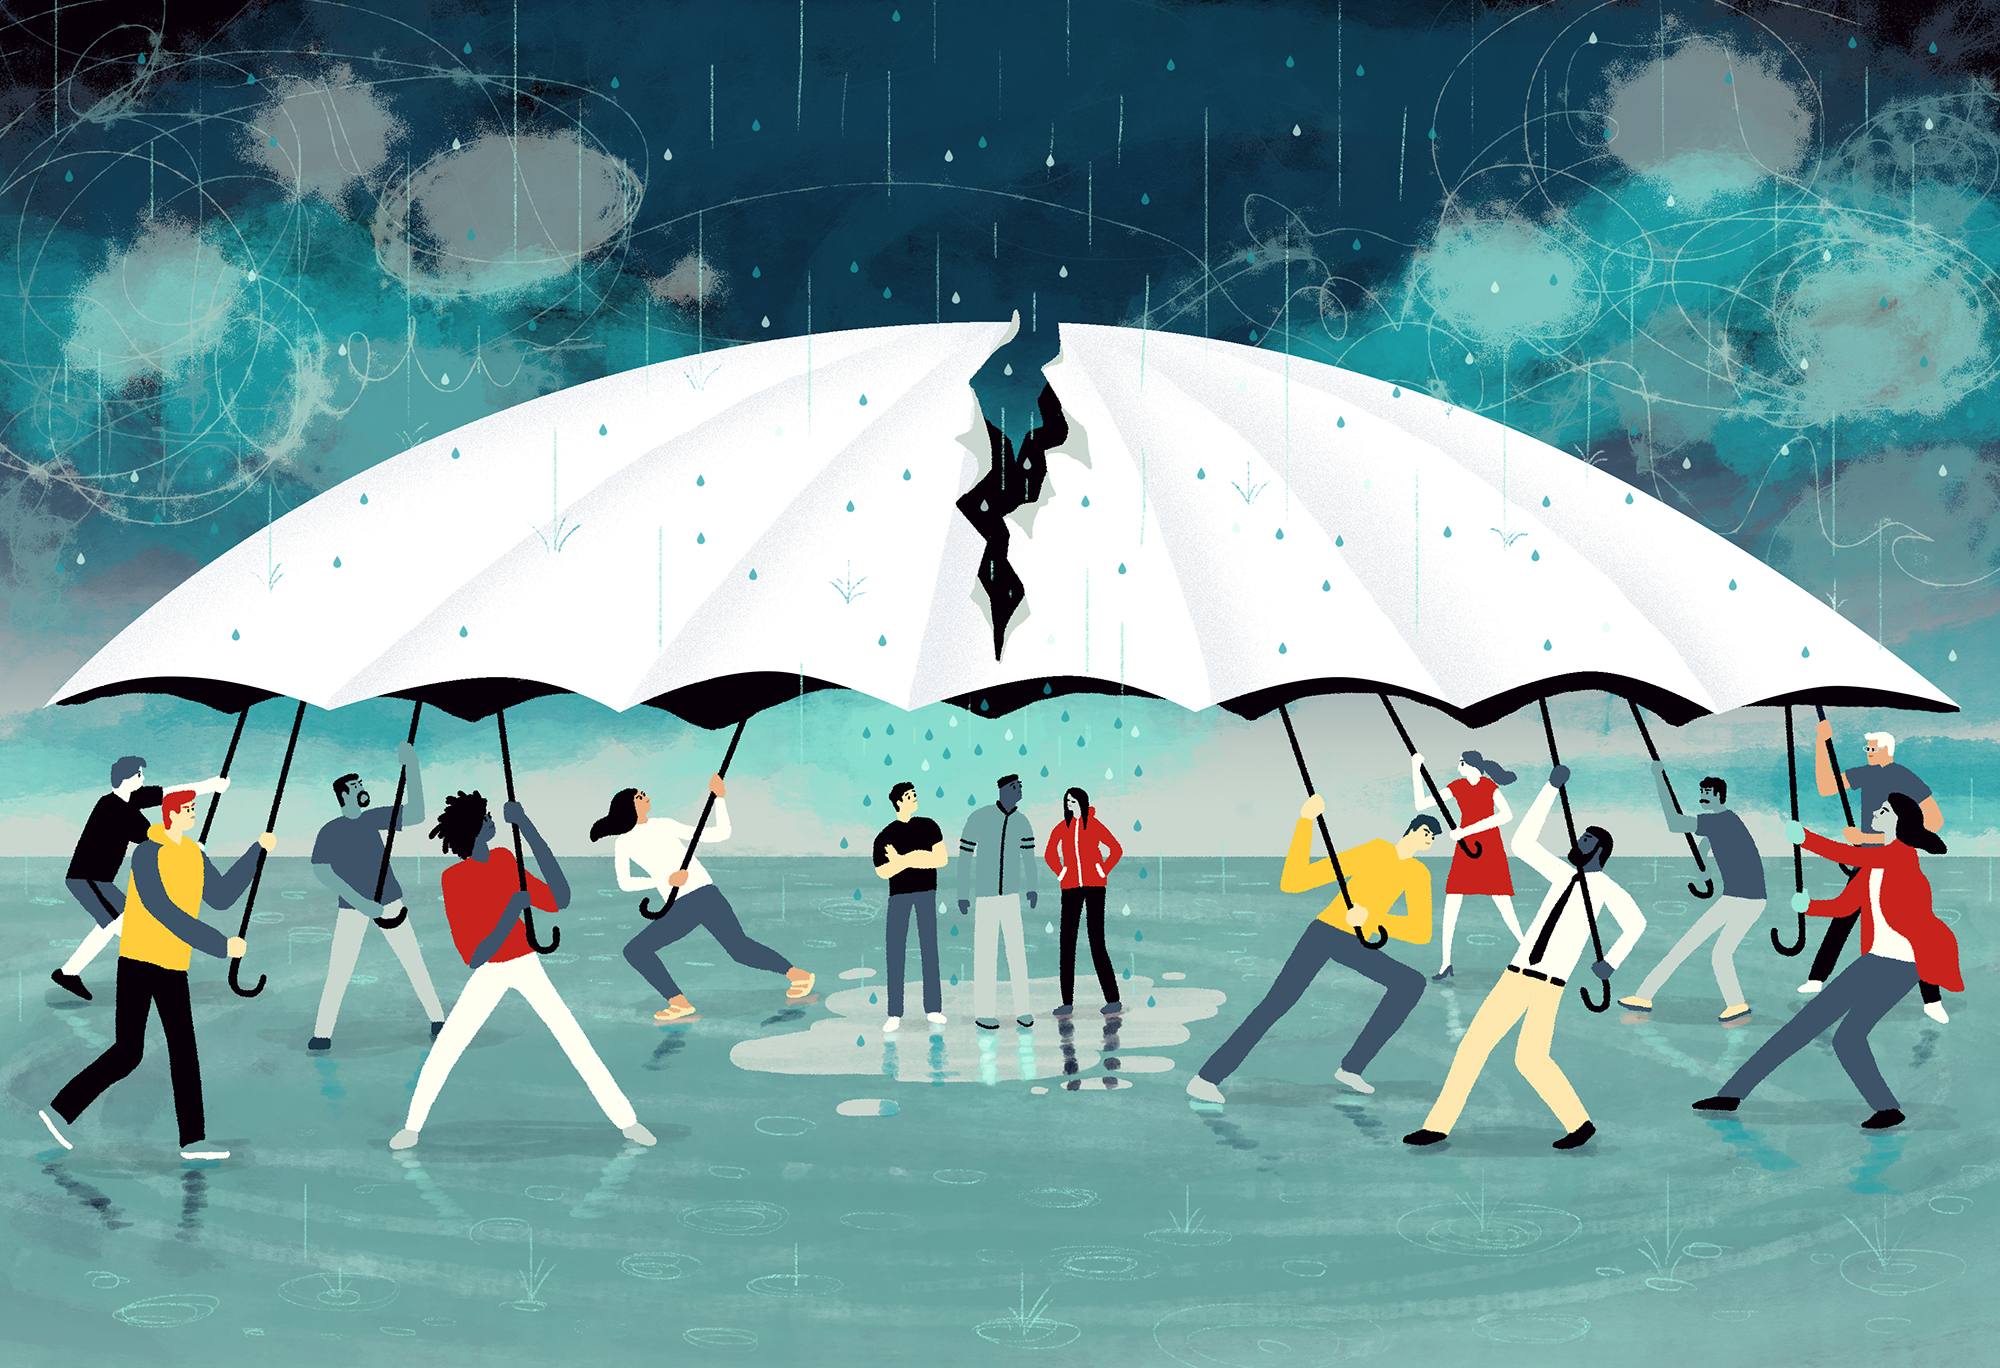 People battling over a giant umbrella, people in the middle are exposed to rain